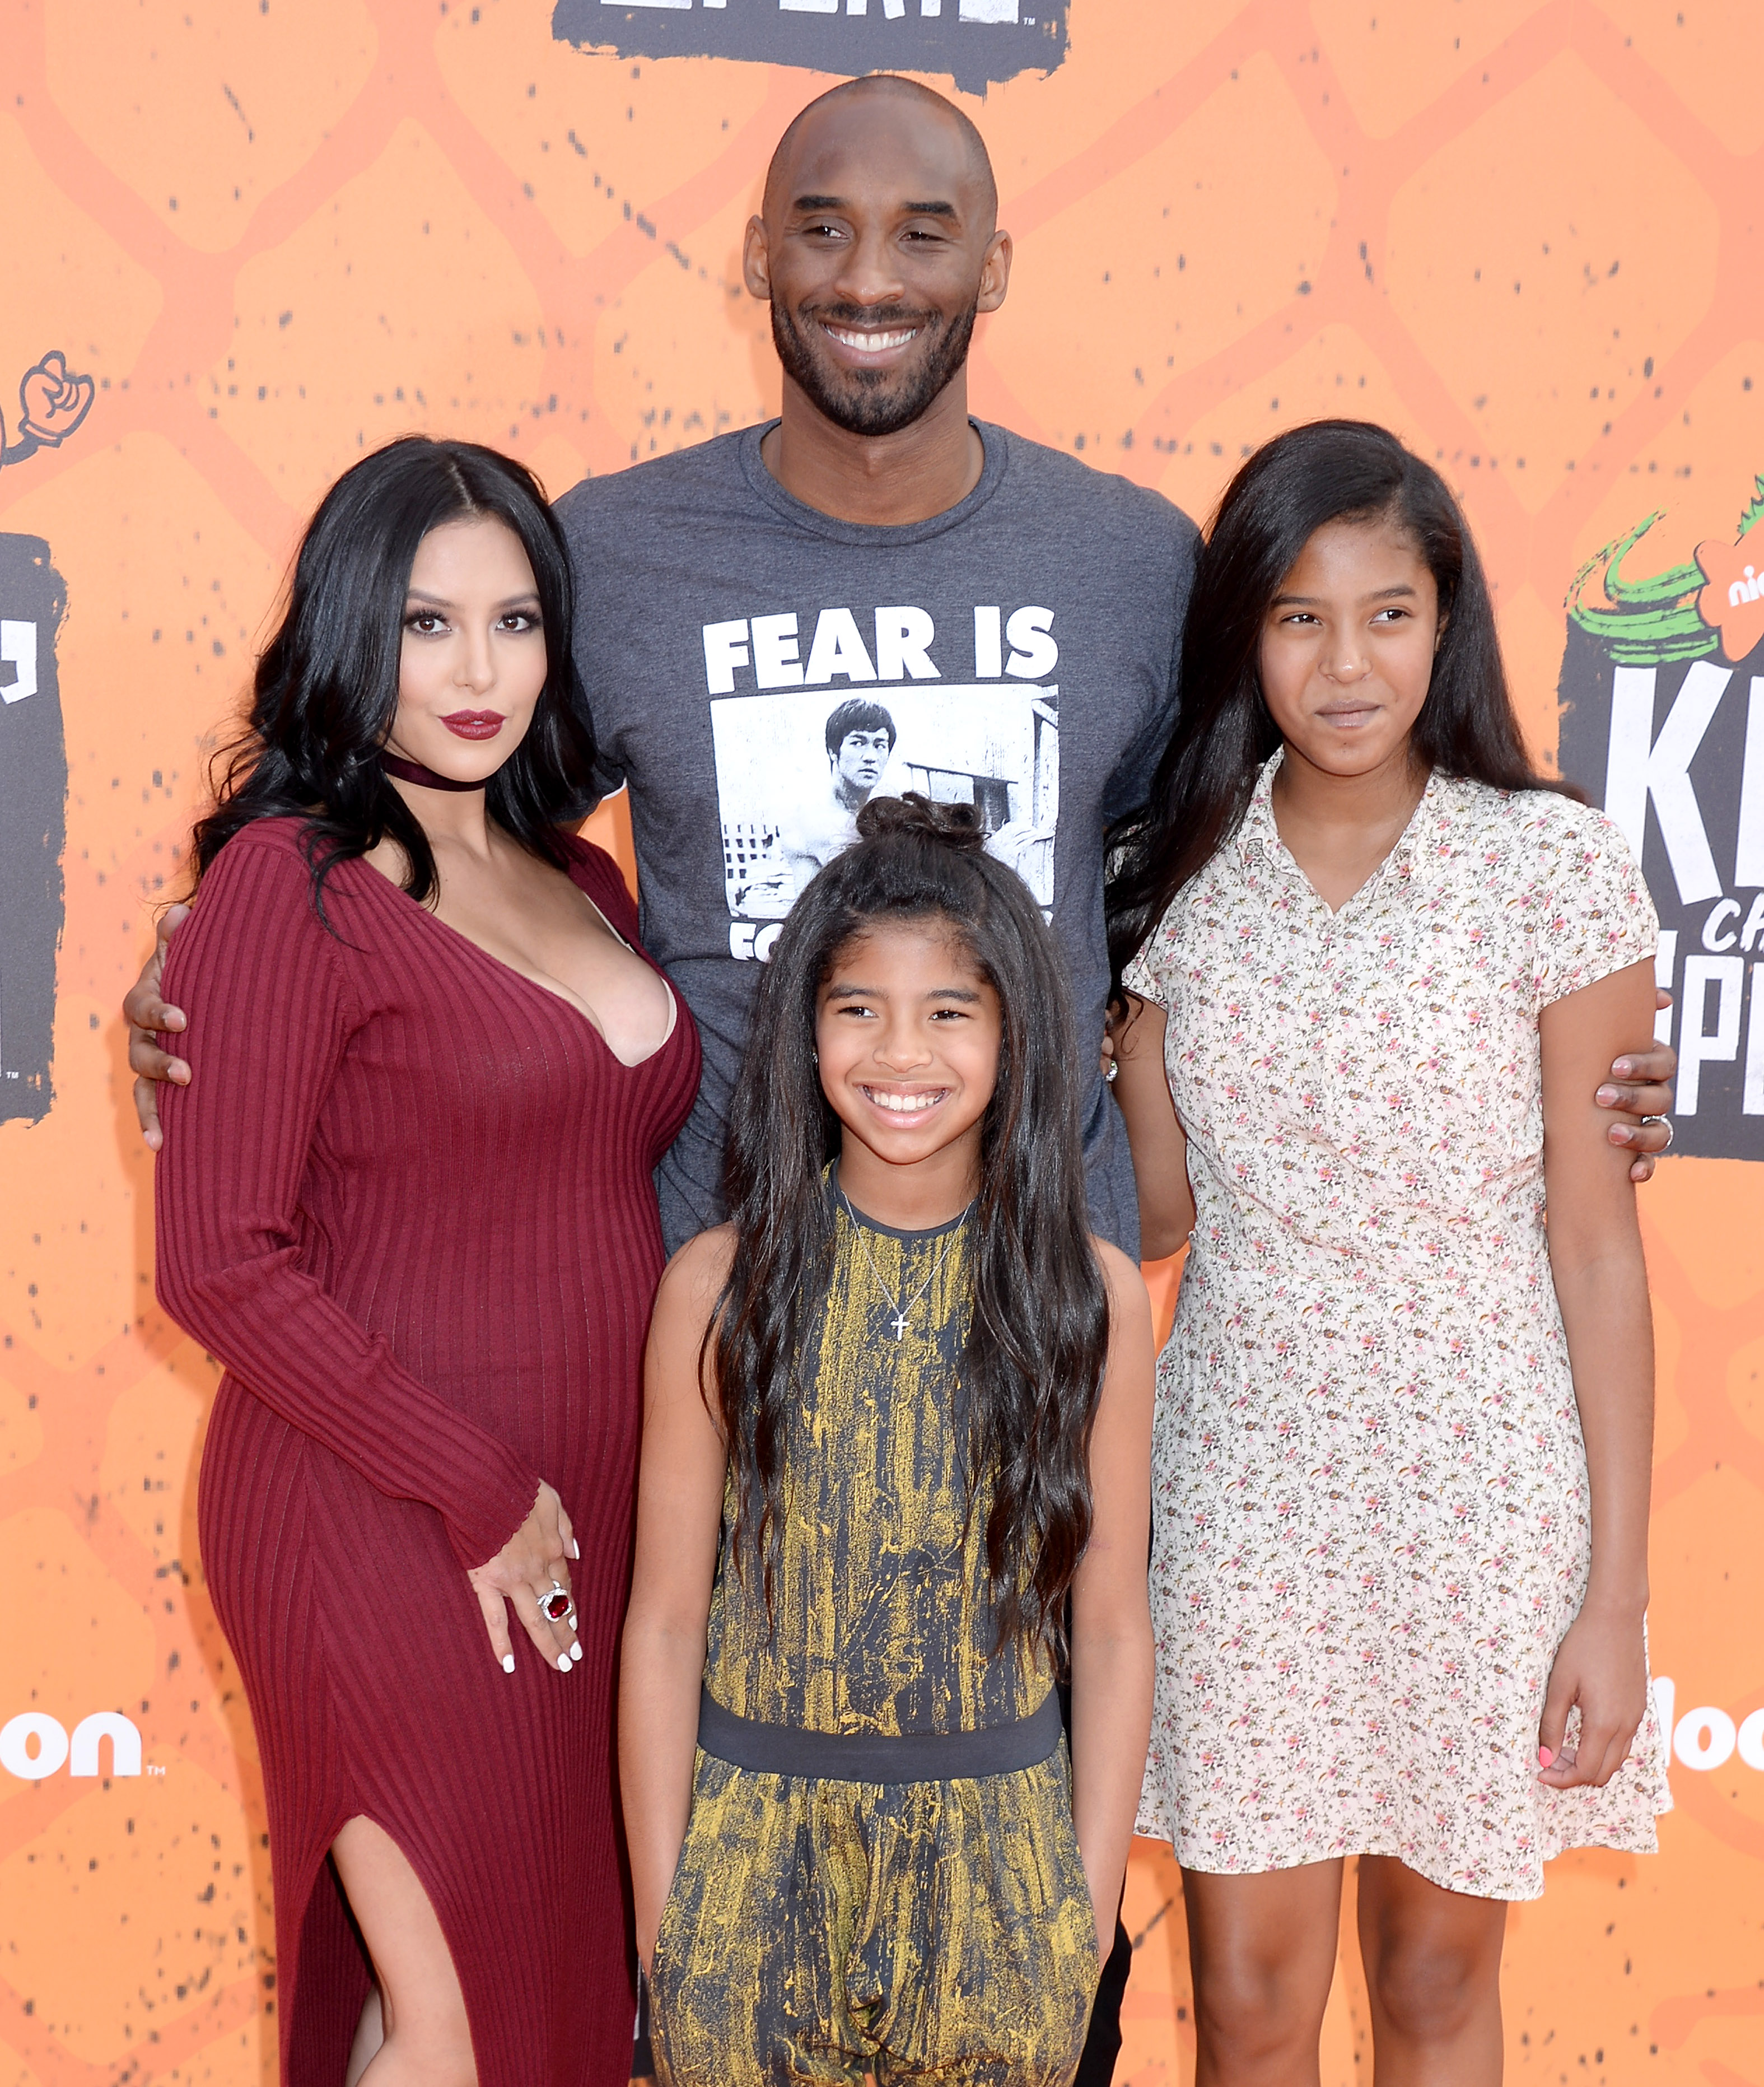 Age kobe bryant daughters Who Are